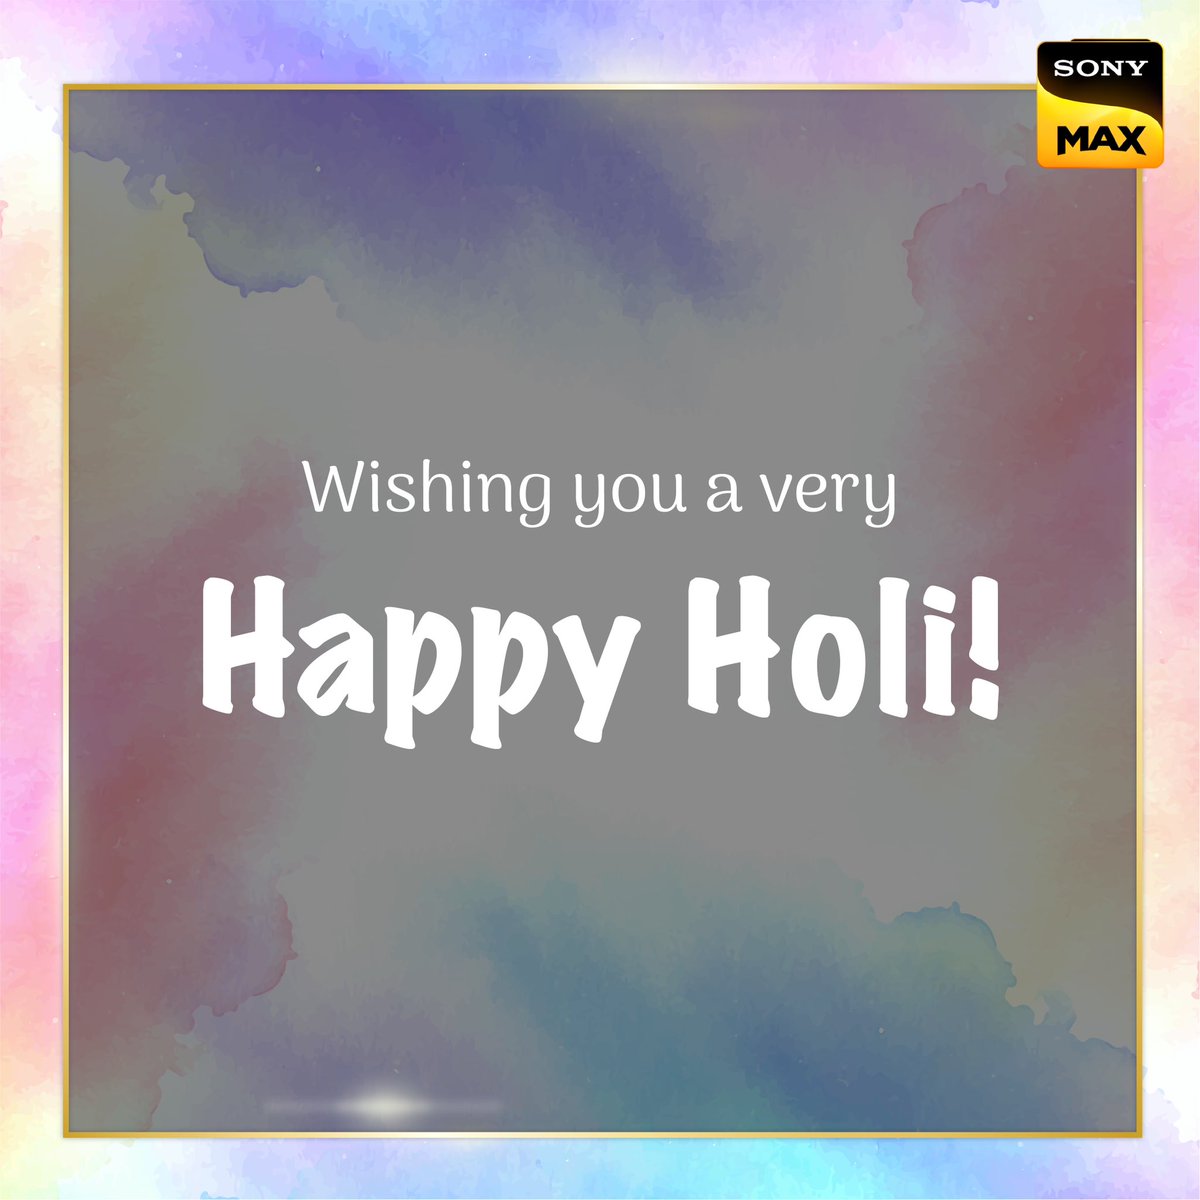 Spreading colors of joy, one emotion at a time. Happy holi, everyone!🌈 #SonyMAX #Bollywood #Holi #DeewanaBanaDe